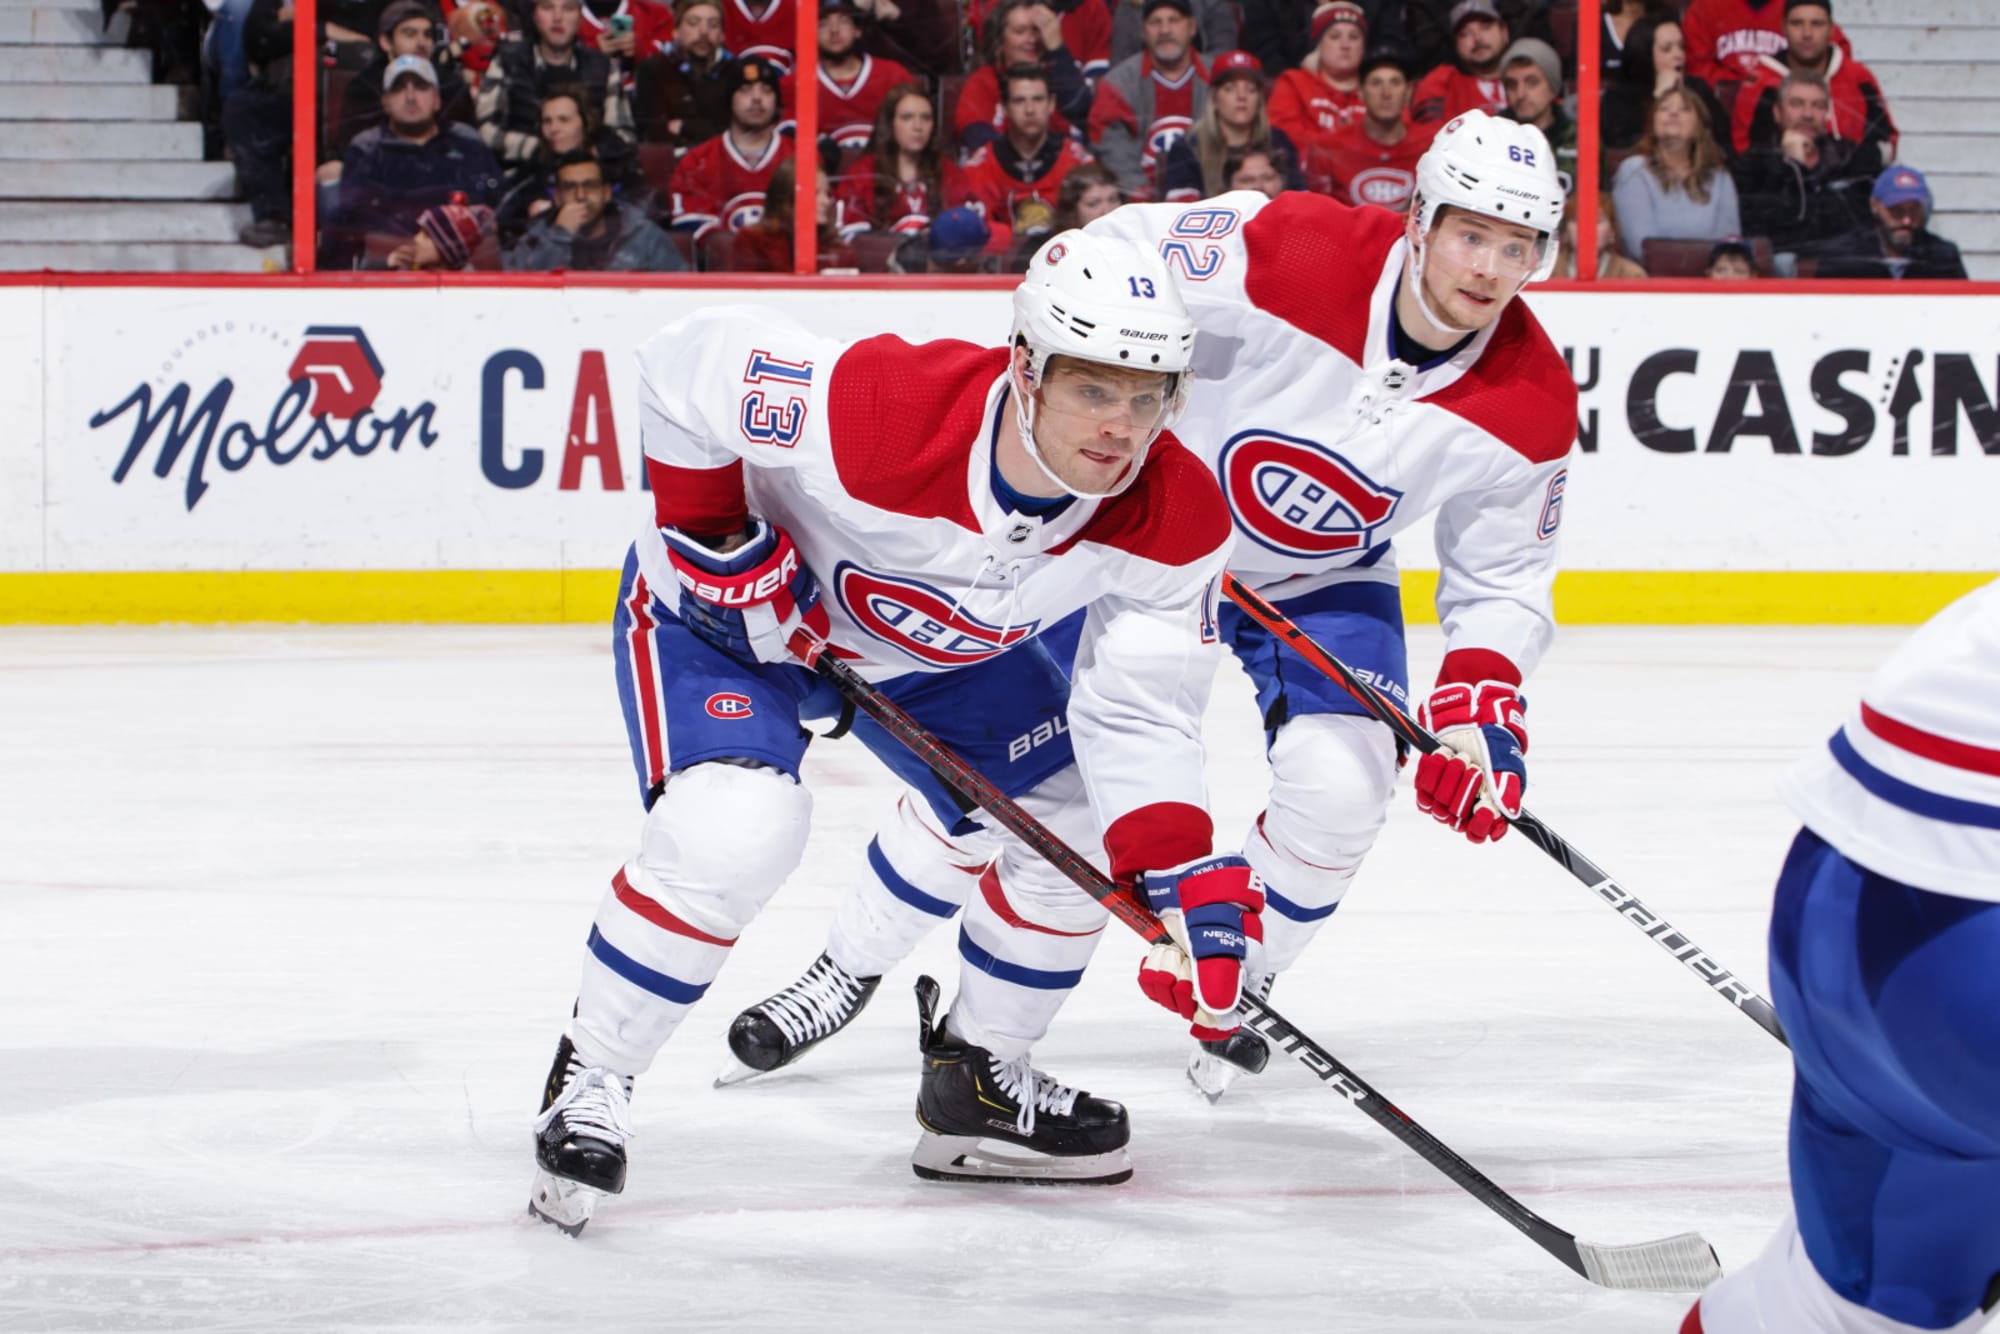 The Montreal Canadiens priority ahead of the offseason